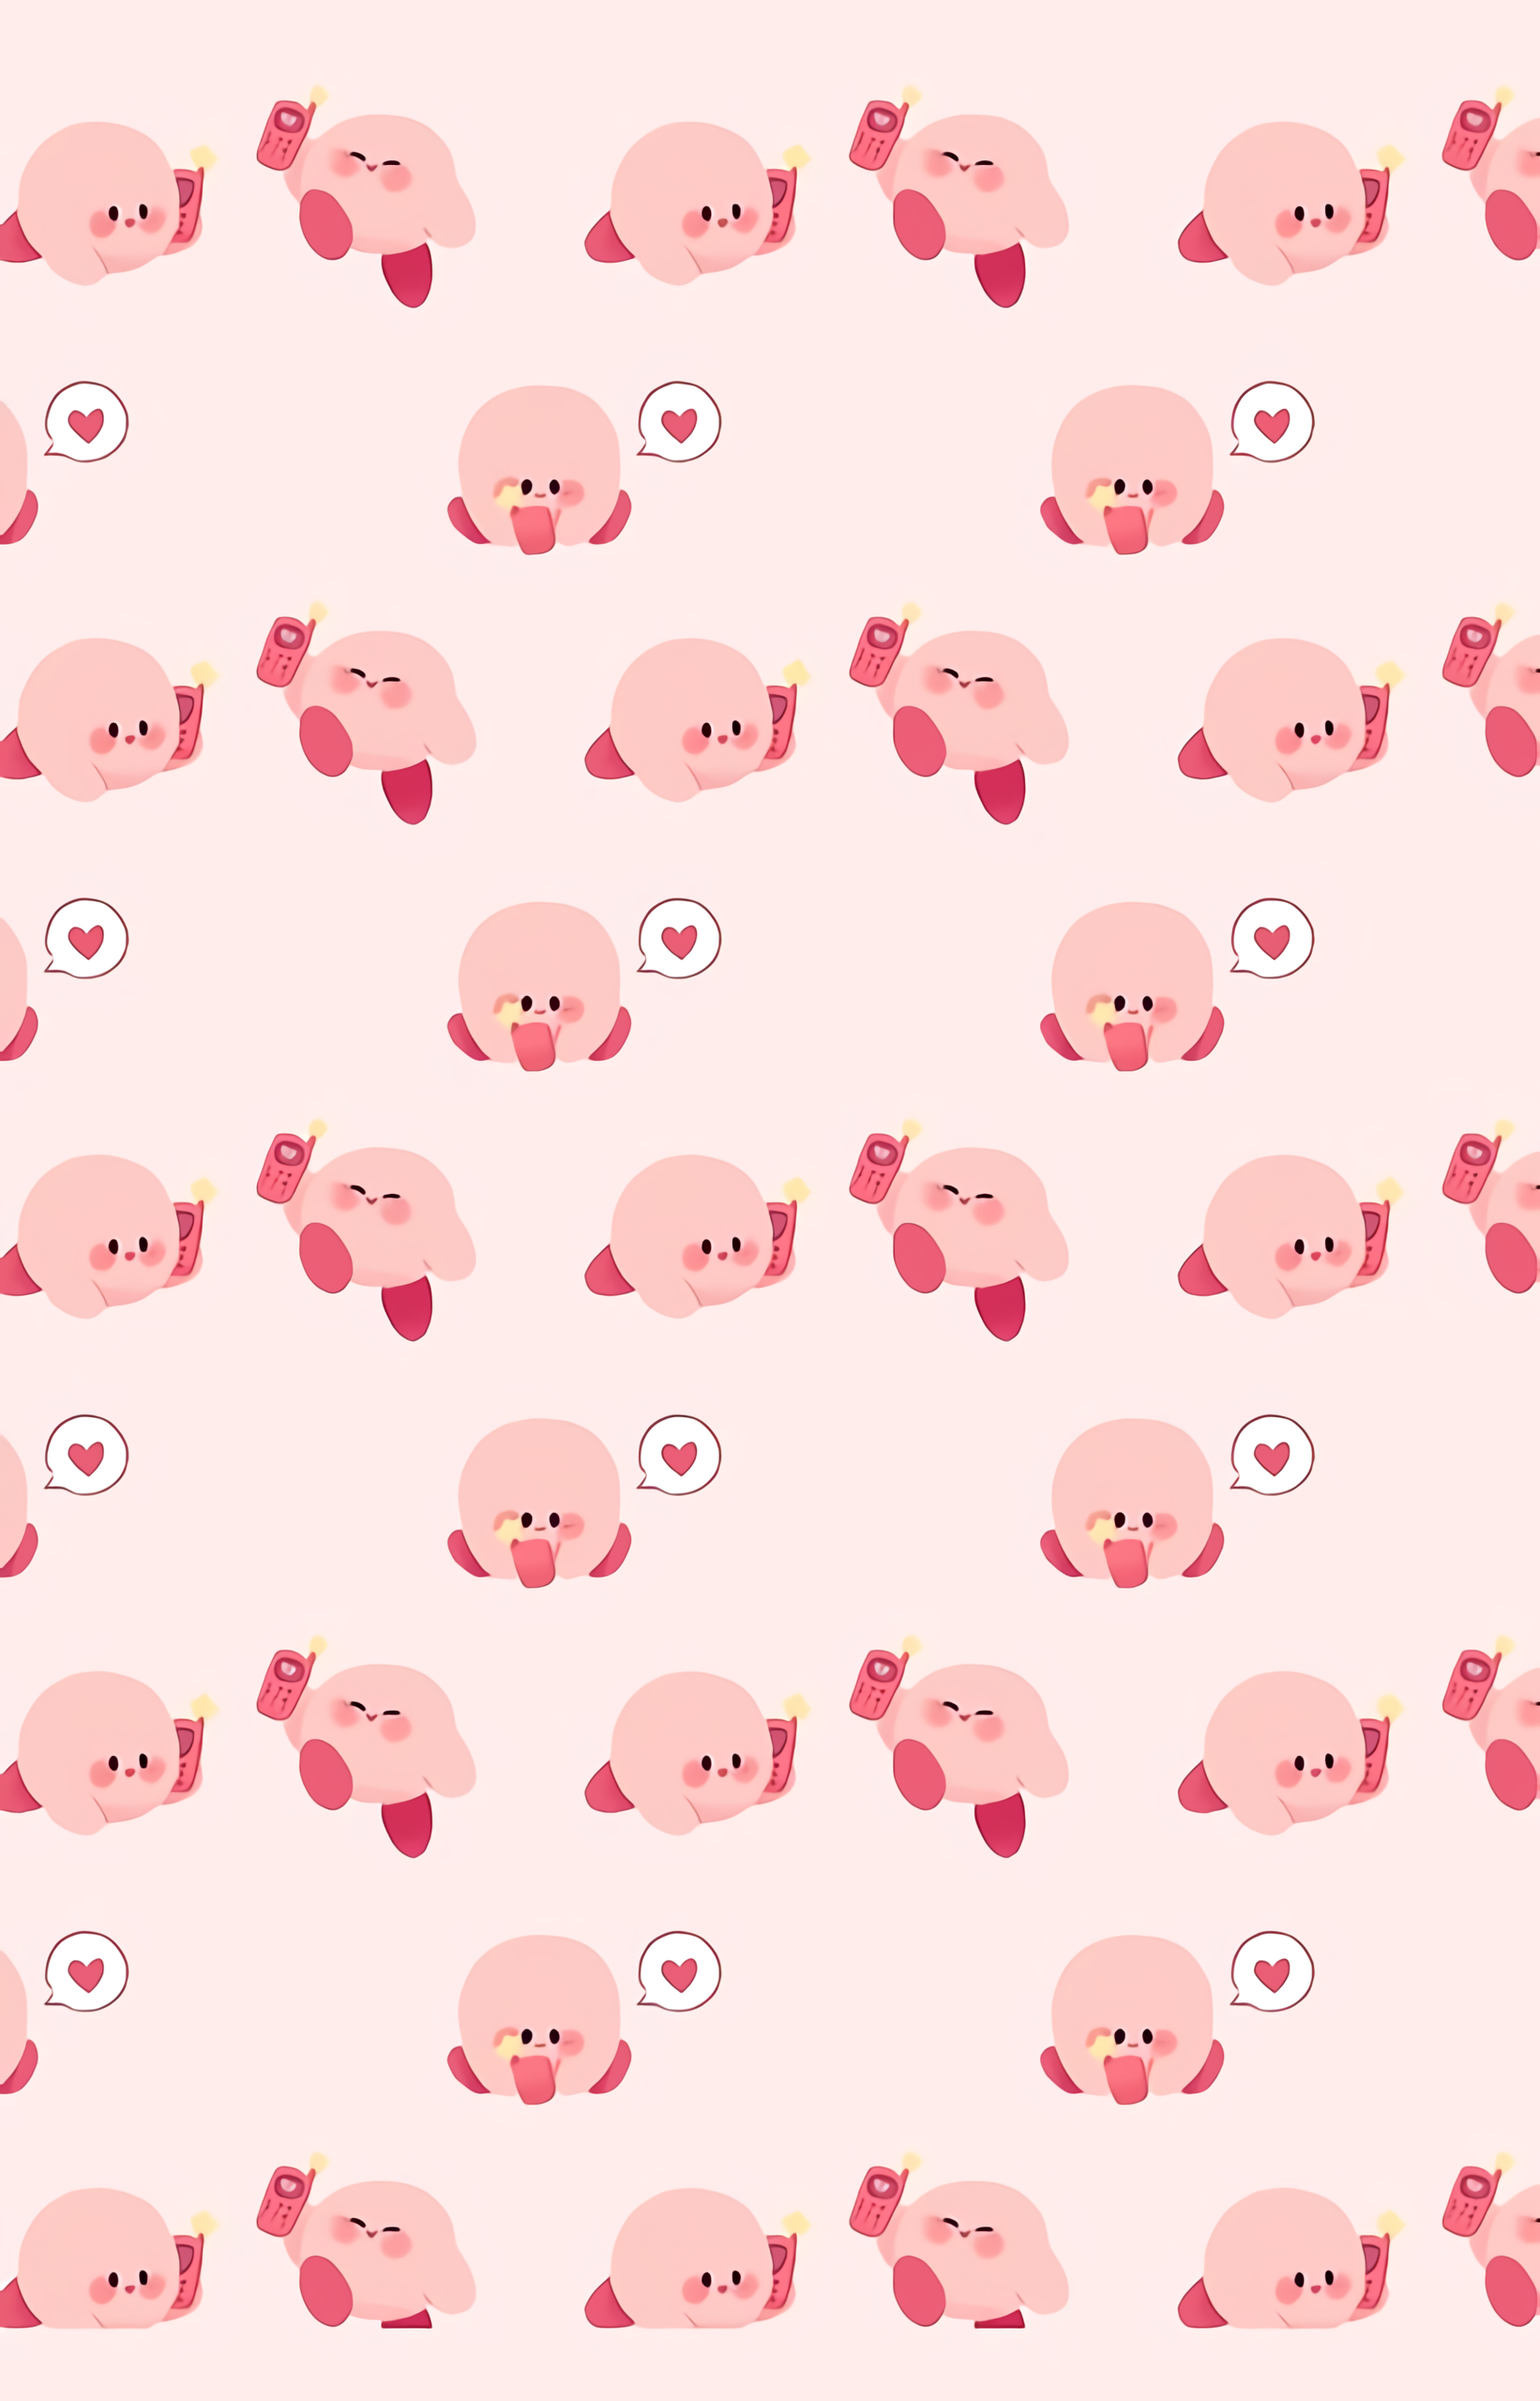 Cute Kirby Wallpaper & Background Beautiful Best Available For Download Cute Kirby Photo Free On Zicxa.com Image